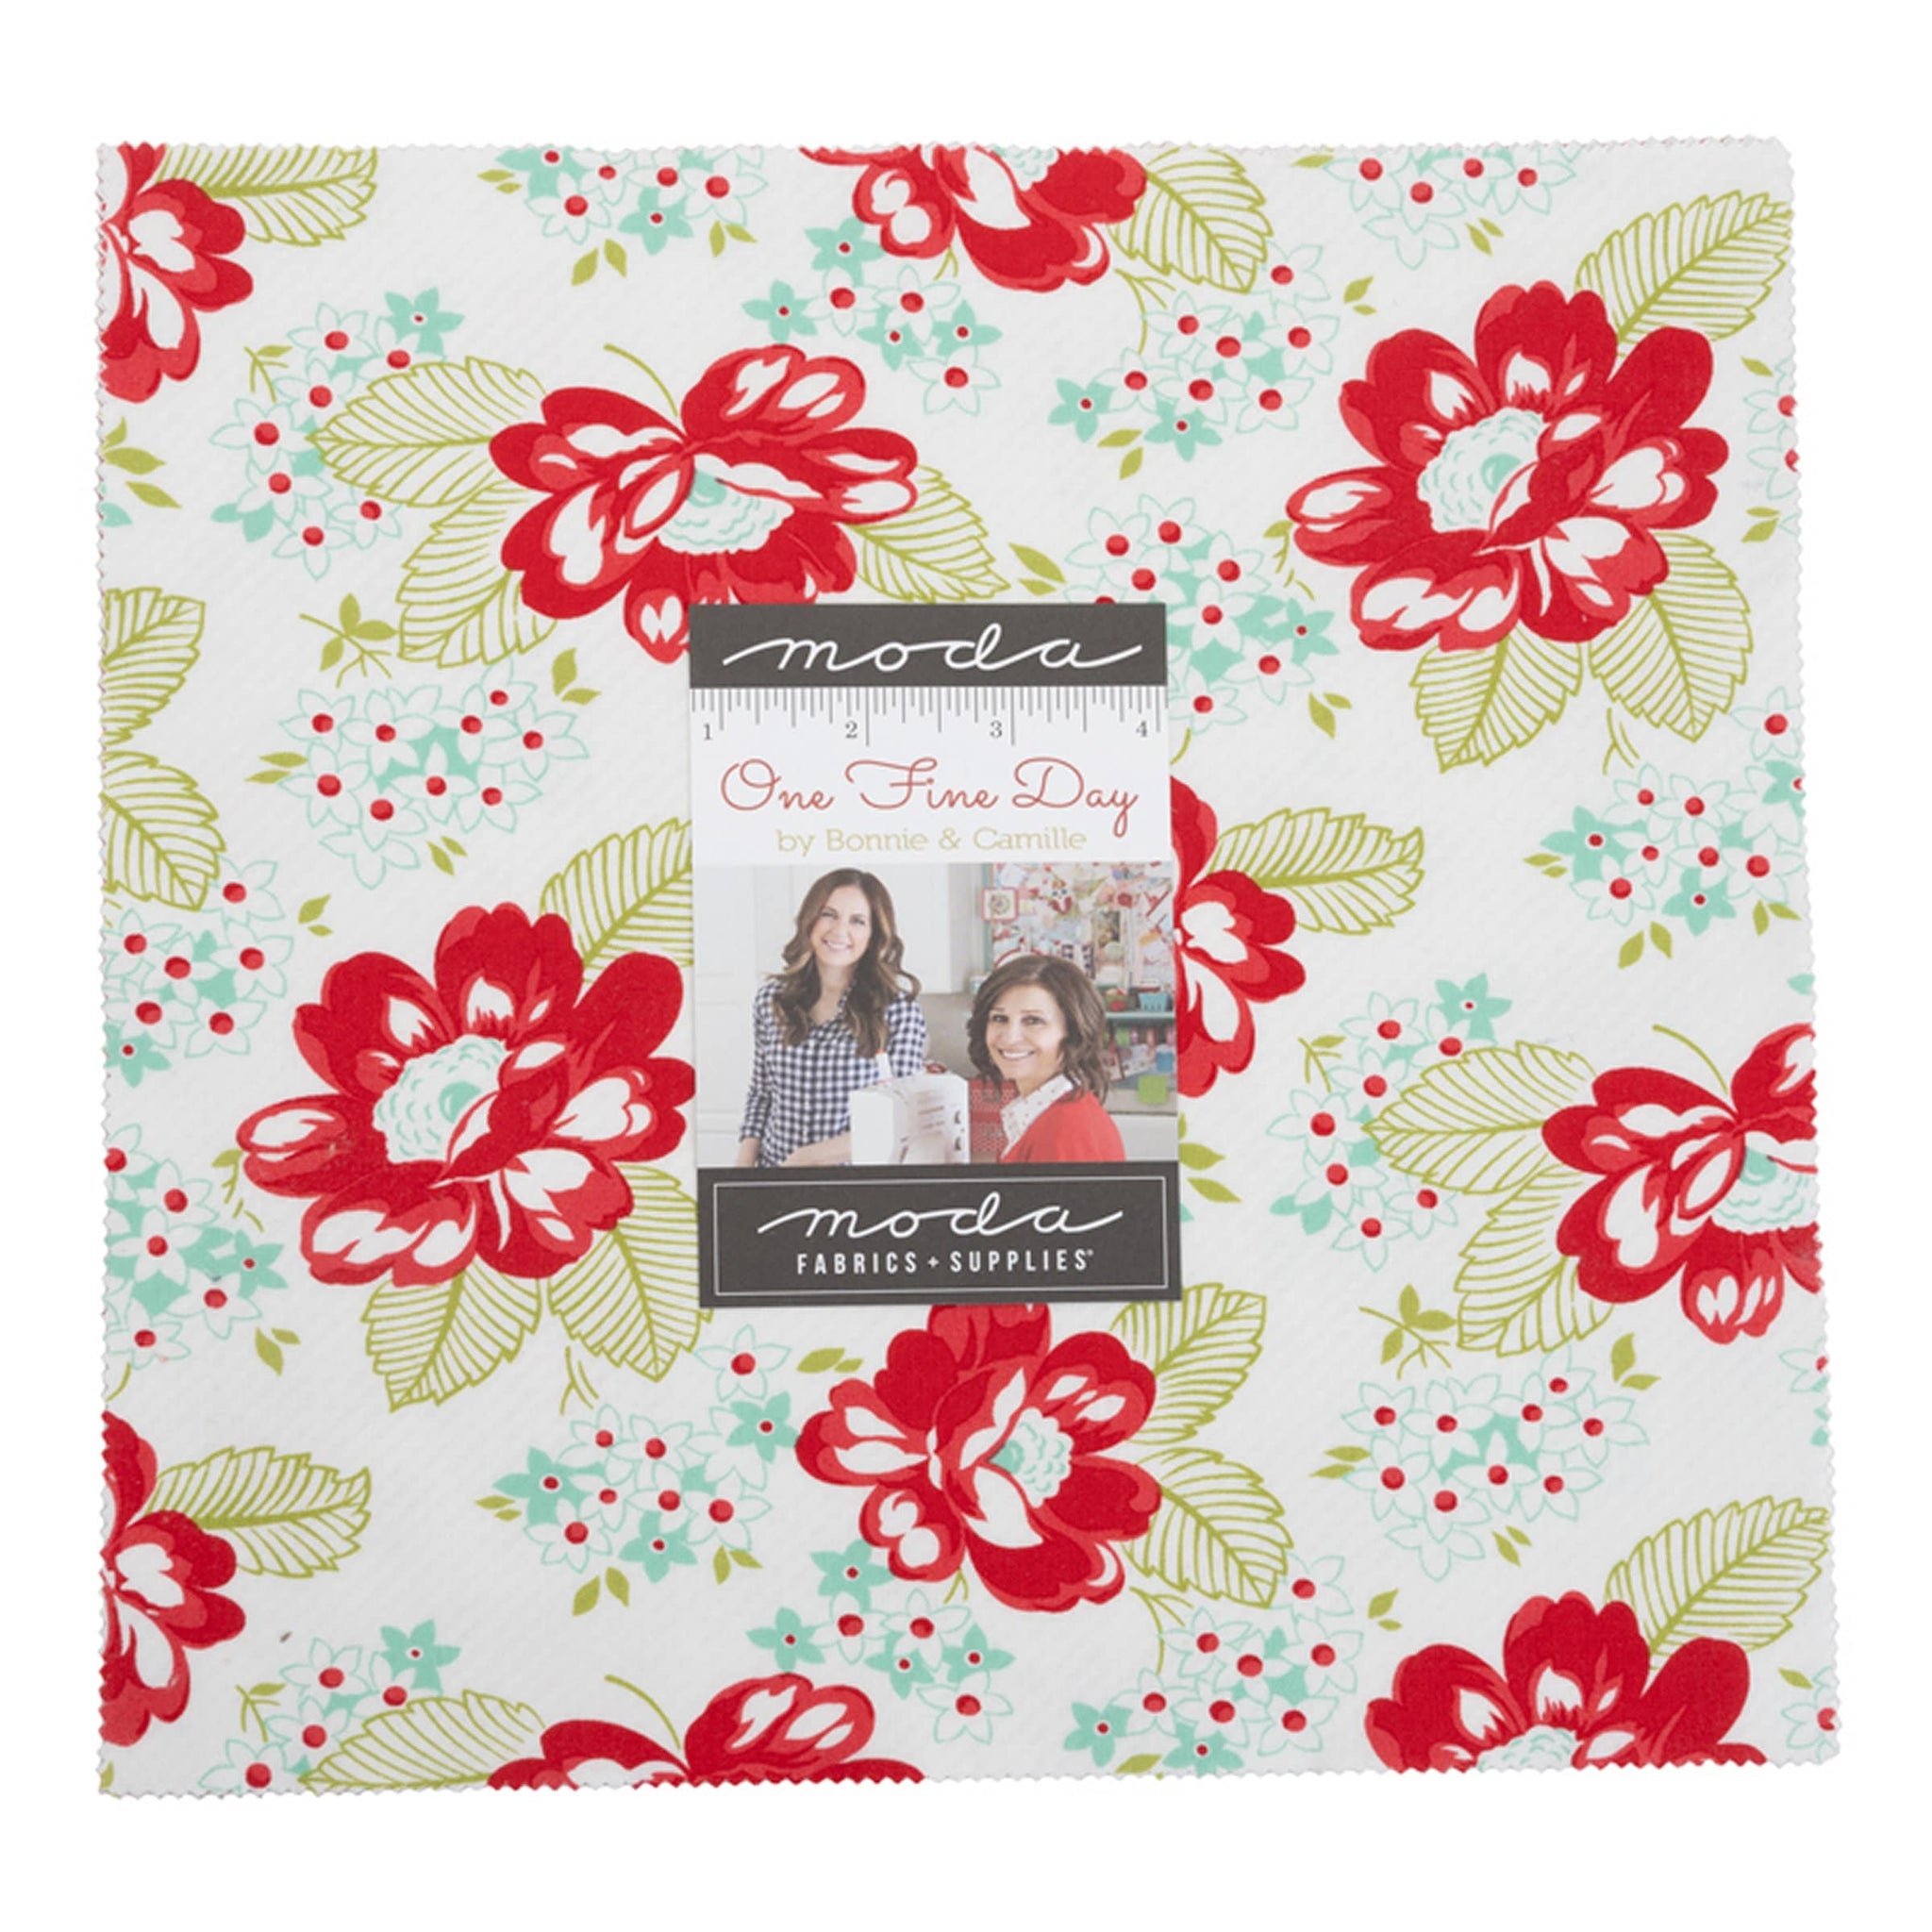 Moda One Fine Day Jelly Roll by Bonnie & Camille 55230JR